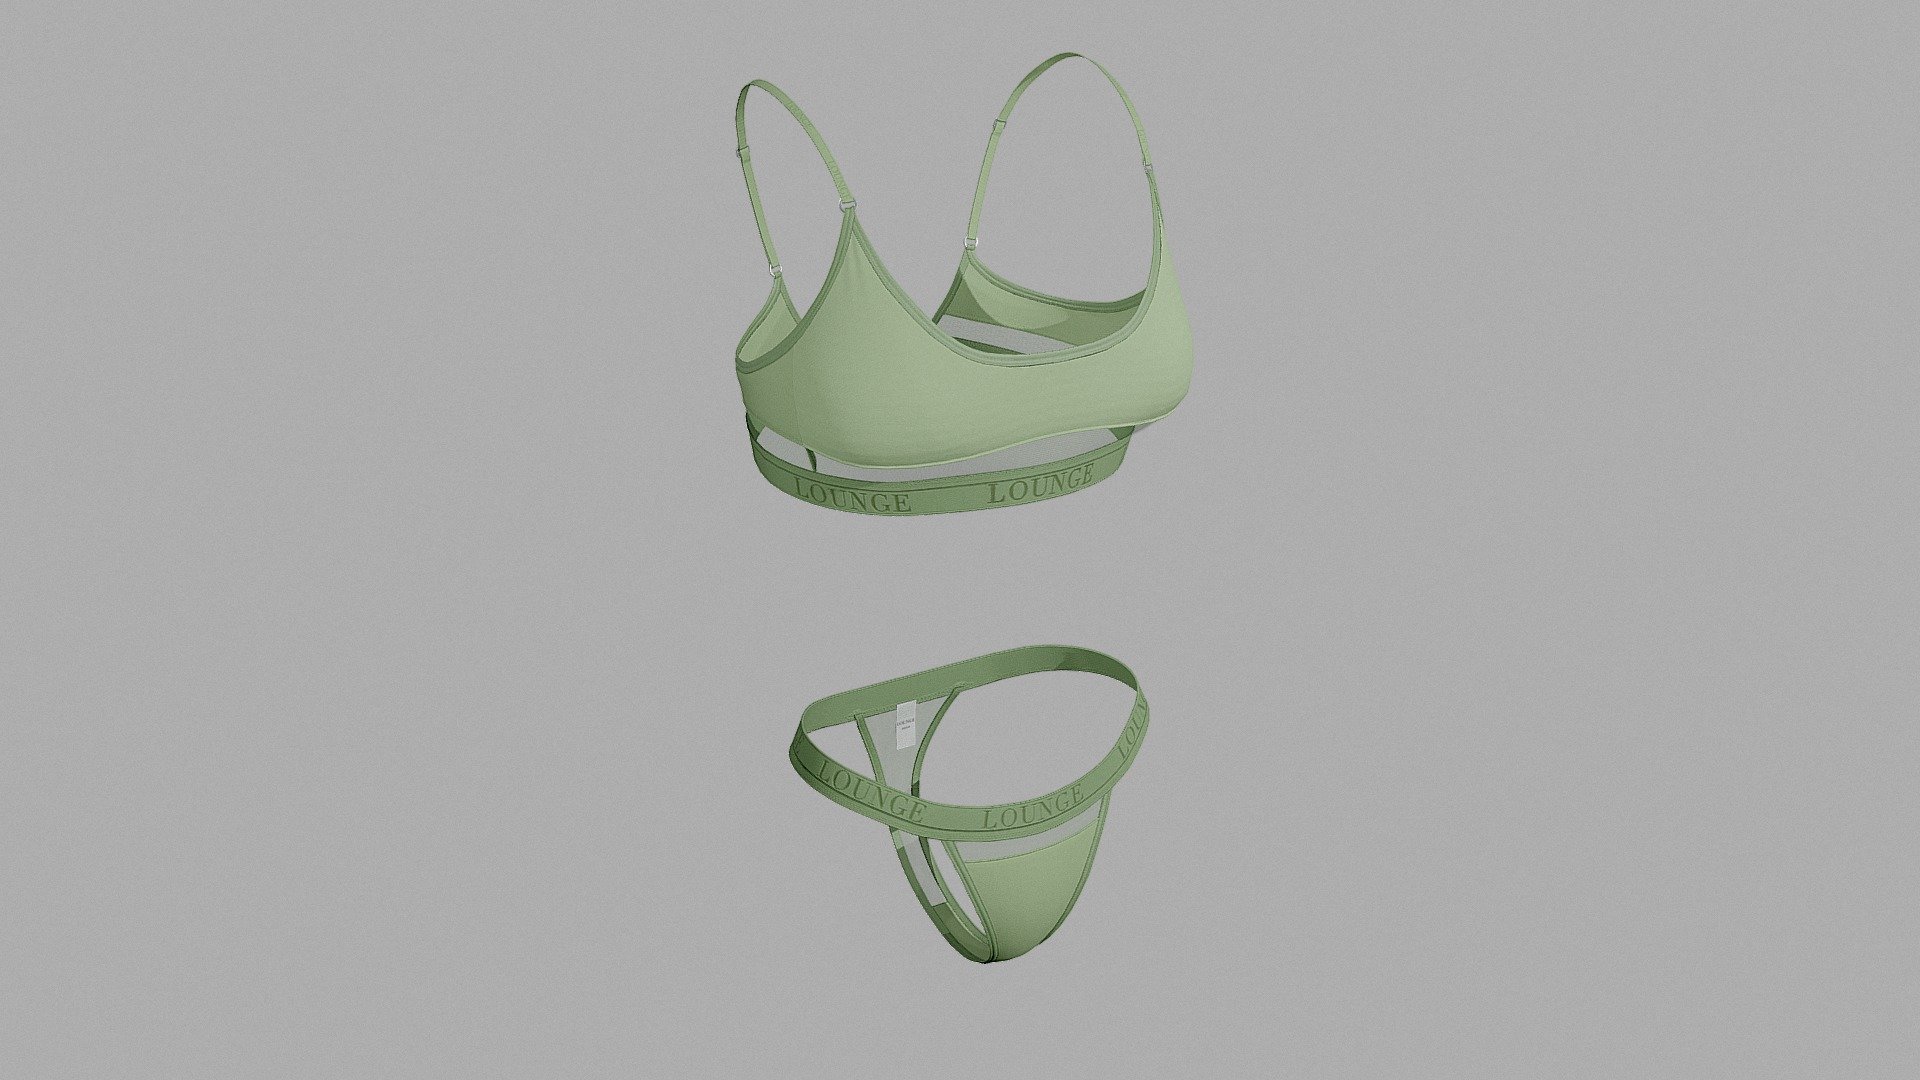 The goal was to create 3D lingerie models based on the actual product for a better shopping experience across e-commerce platforms.
3D lingerie modeled with ZBrush and textured with Substance Painter 3d model